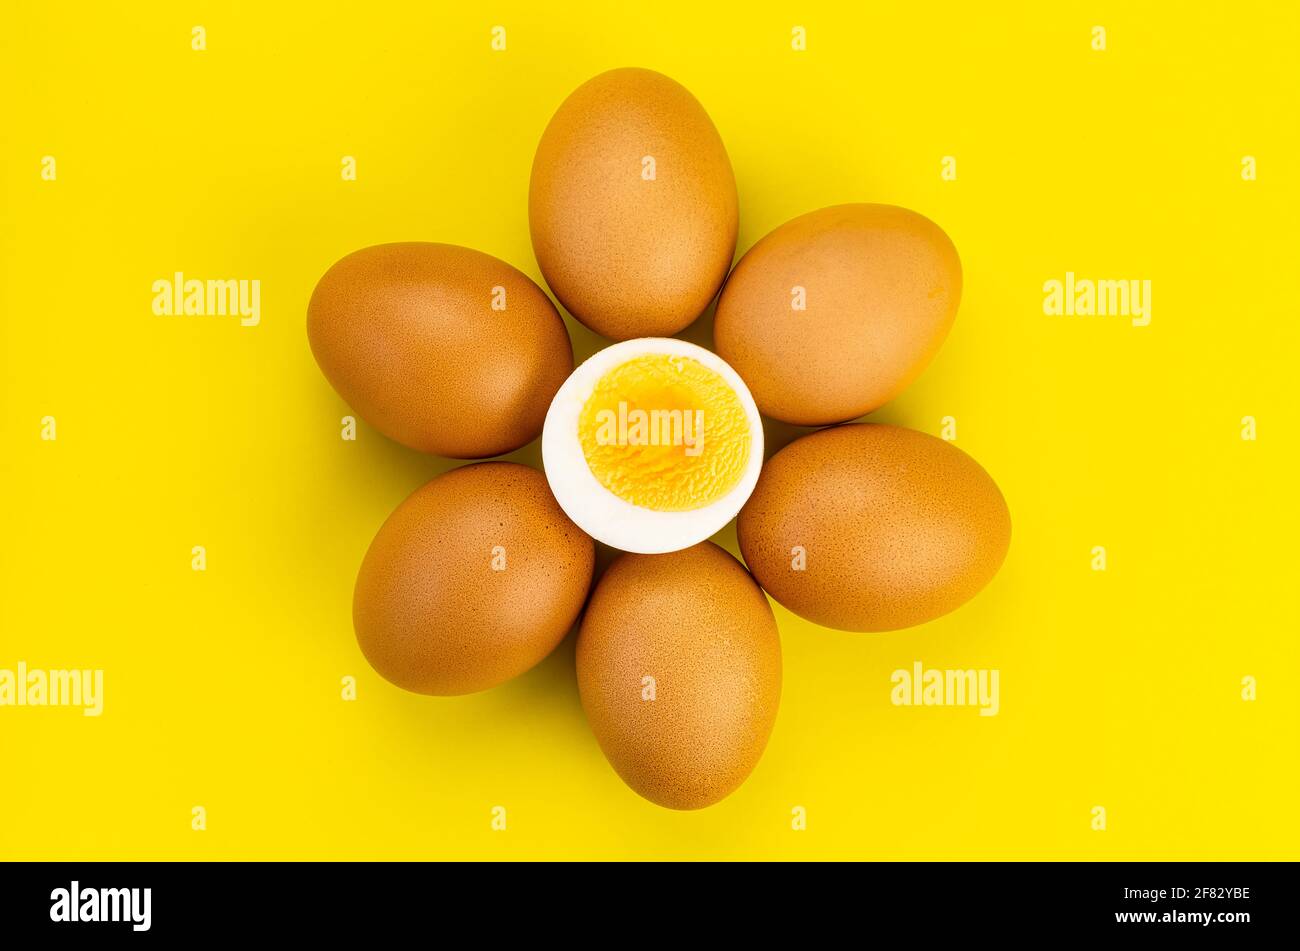 Top view group of whole chicken eggs and a half boiled egg deocorated on yellow background Stock Photo